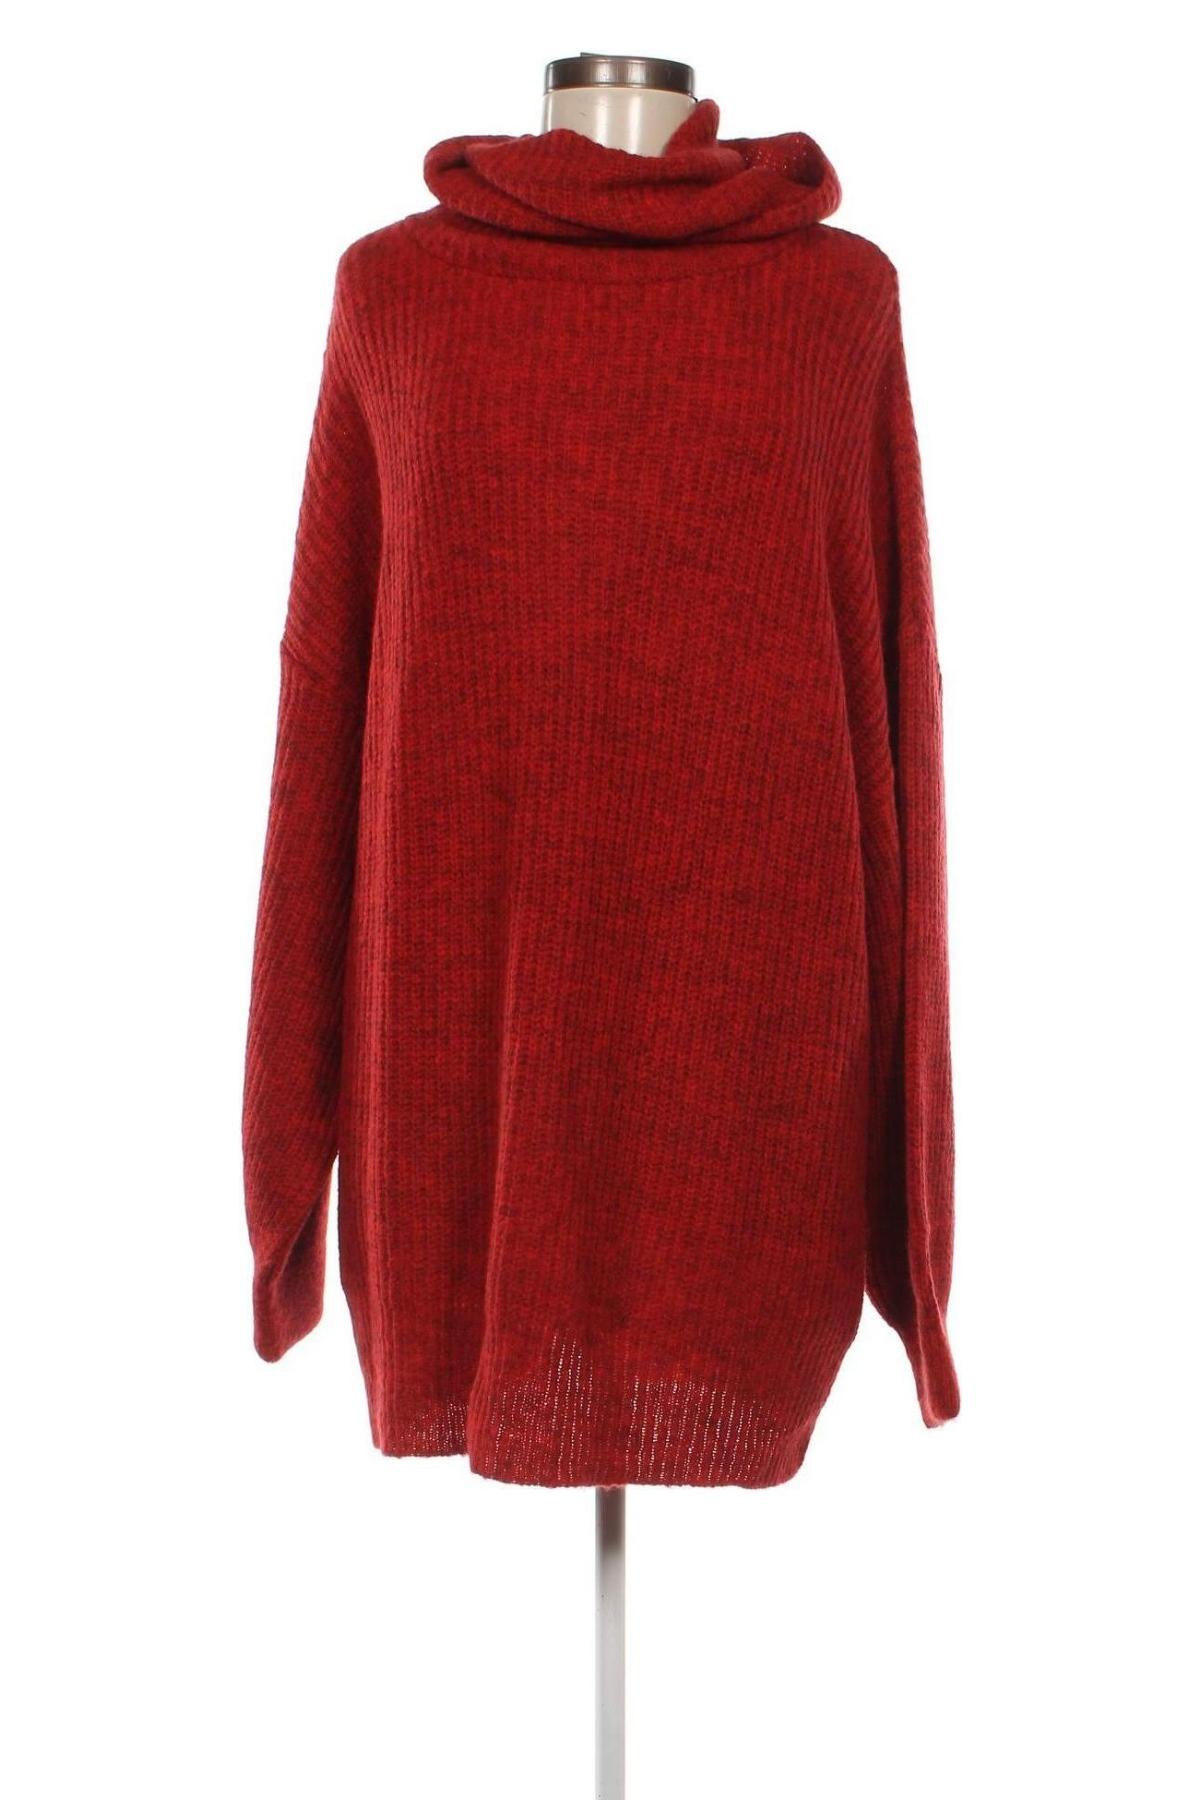 Kleid LeGer By Lena Gercke X About you, Größe L, Farbe Rot, Preis 10,20 €